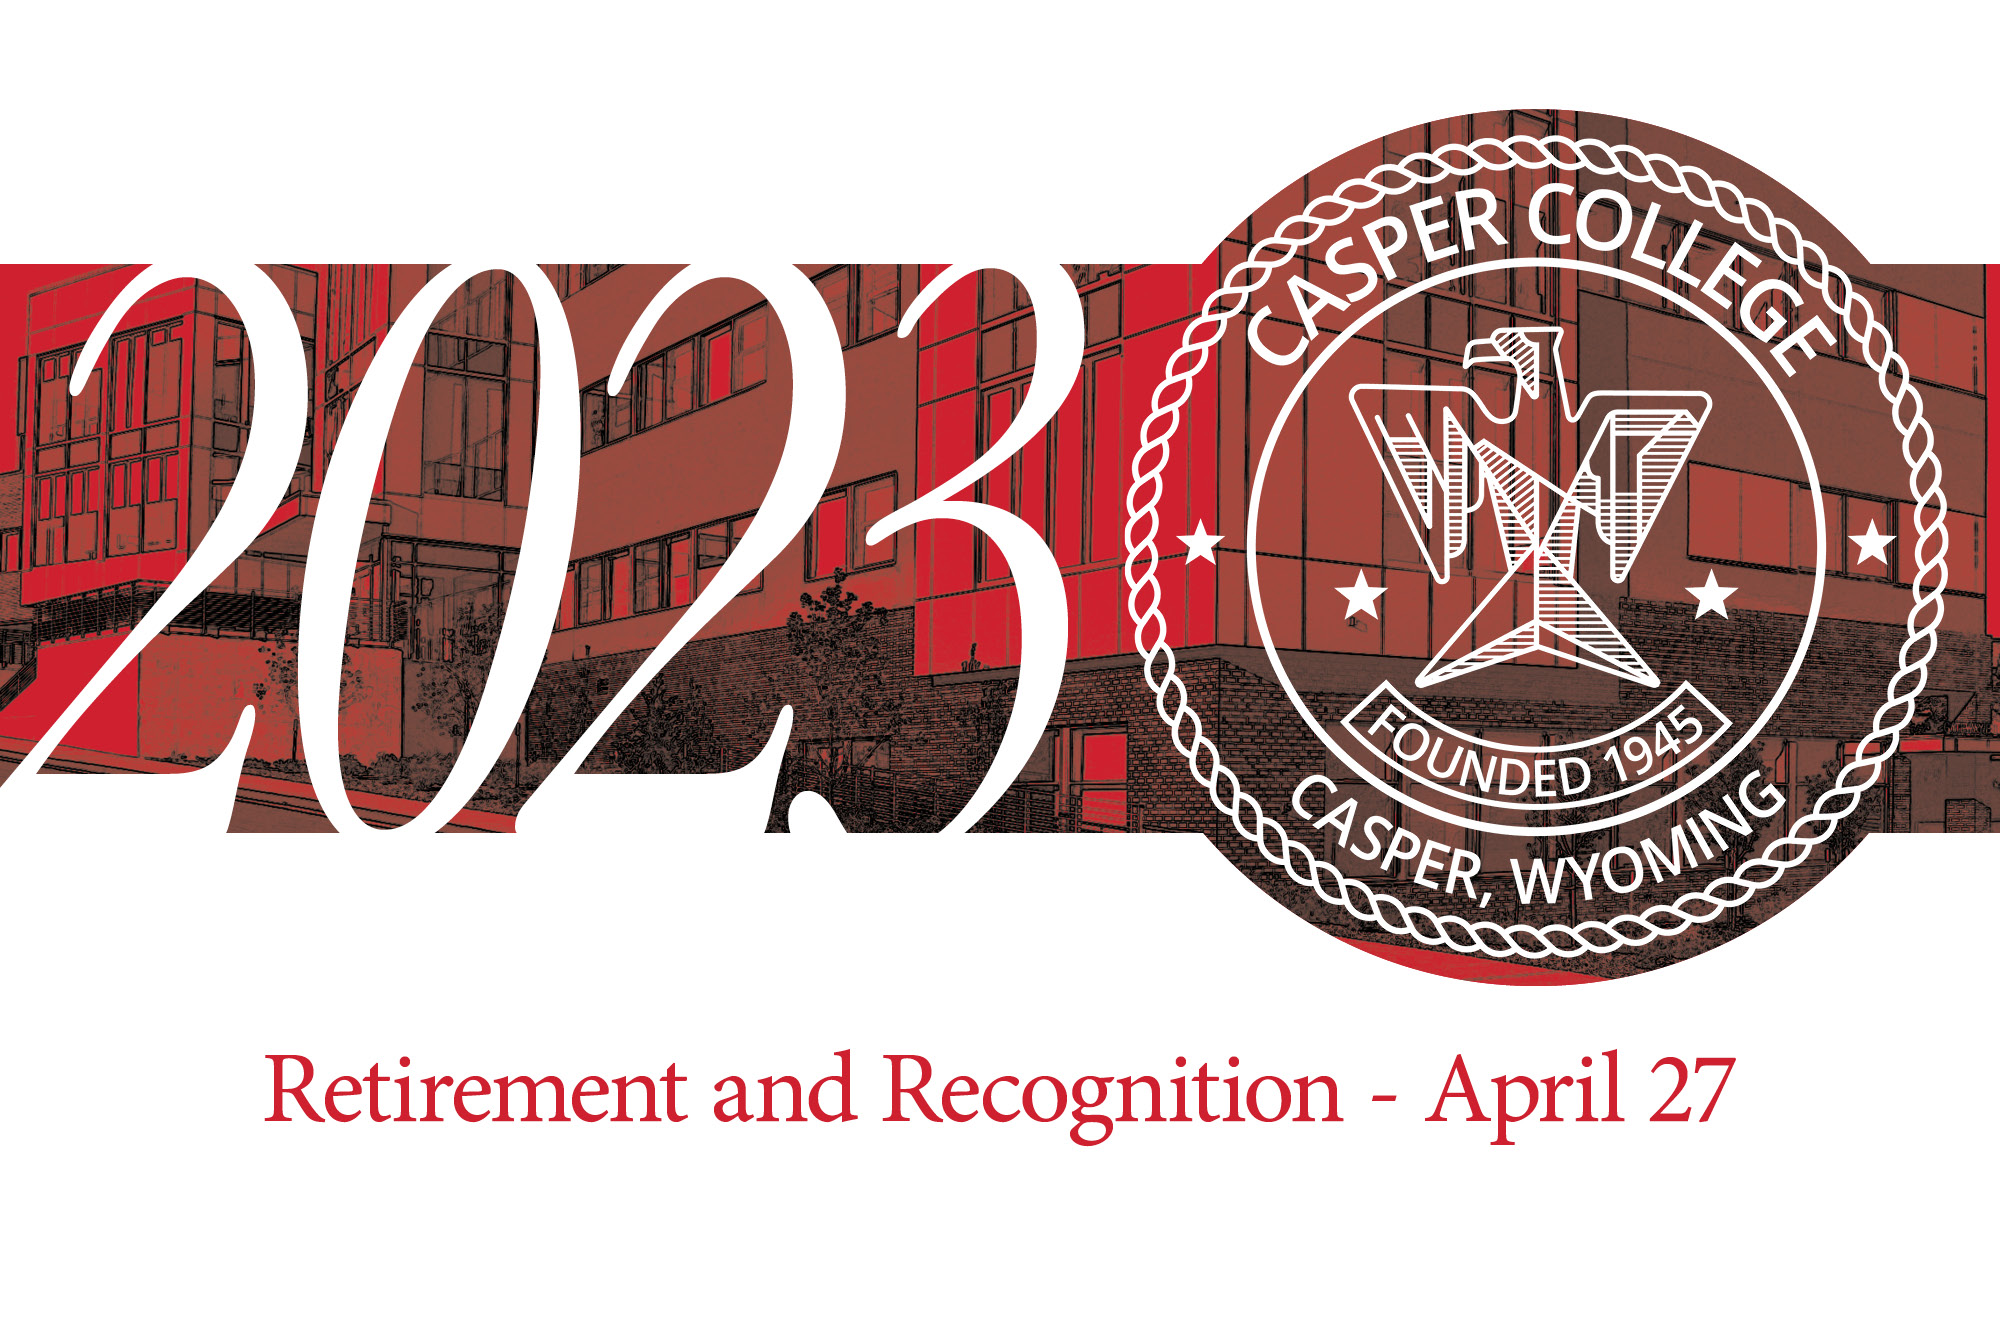 Image for retirement and recognition for the 2022-2023 school year at Casper College.